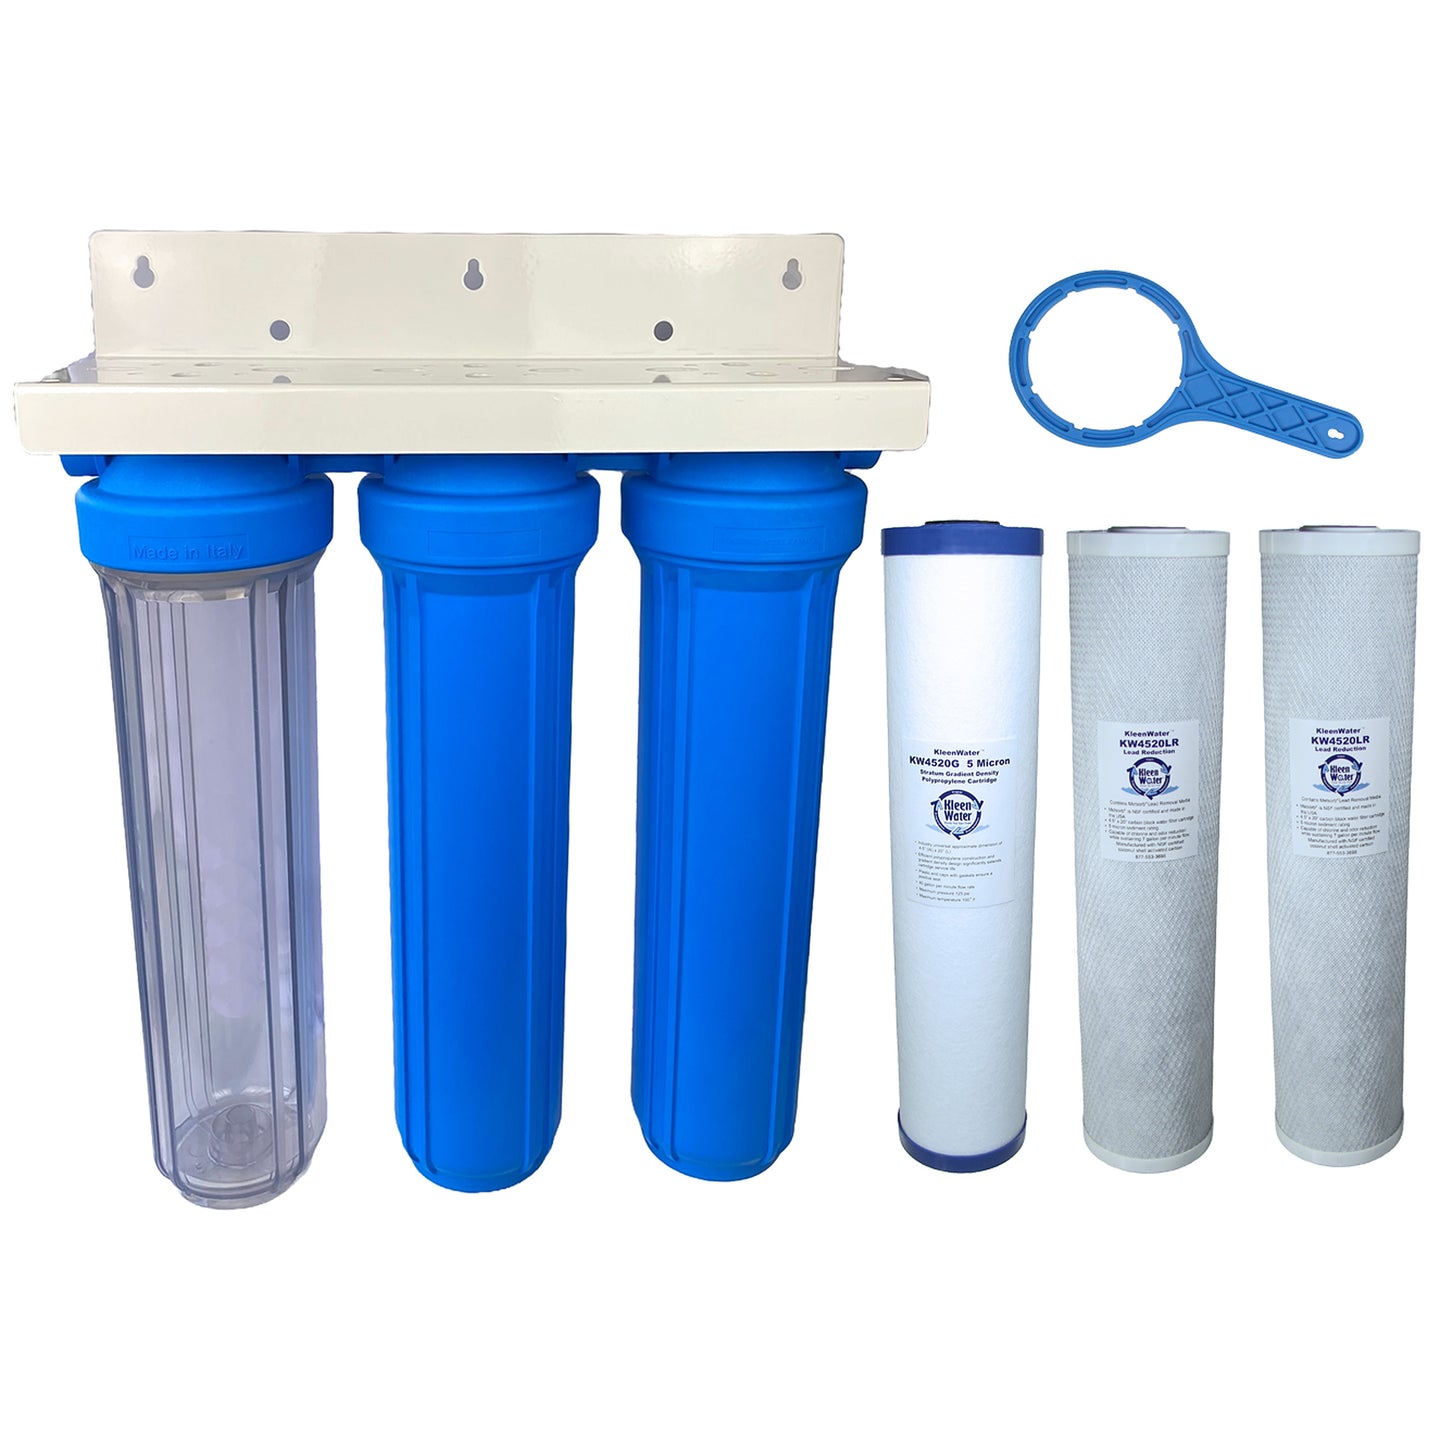 KleenWater Triple Stage Whole House Water Filtration System for City / Municipal Water to remove Lead, Chlorine, HAA5, THM, DBP & Chemicals